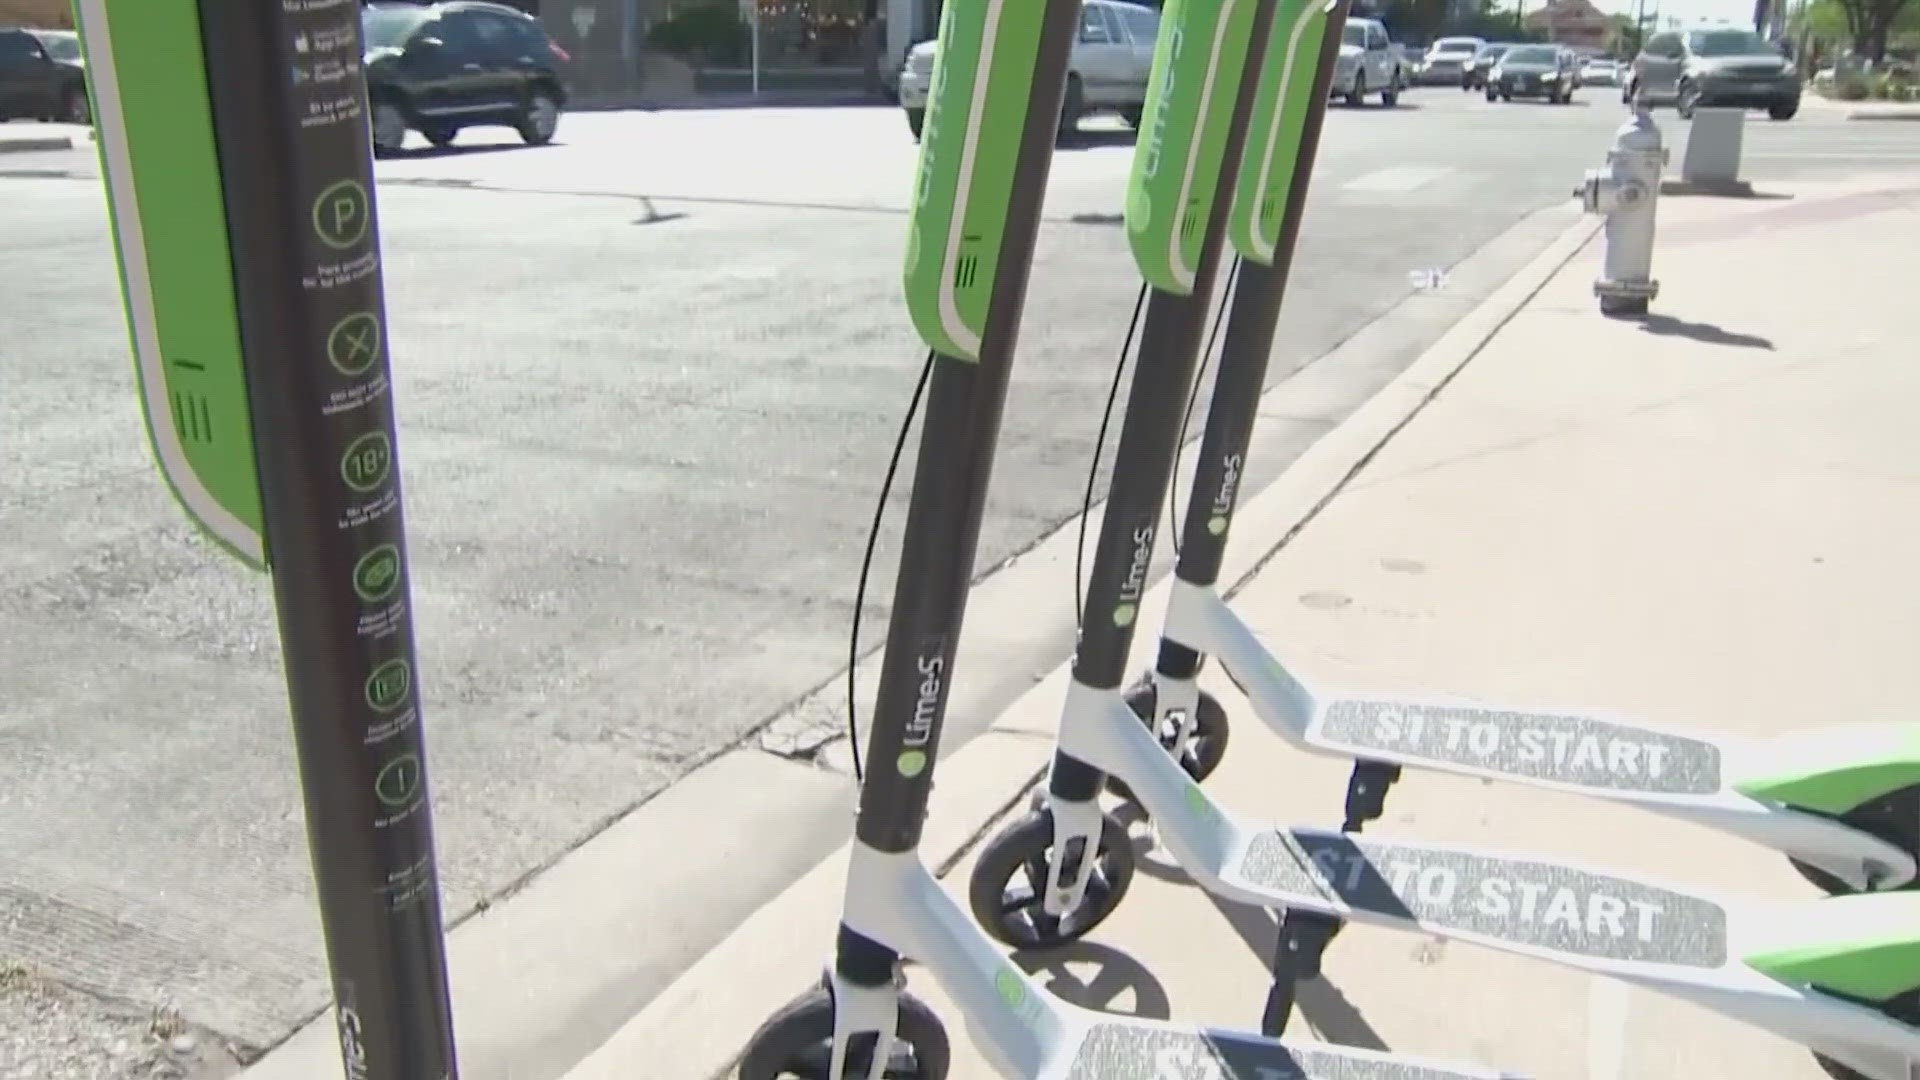 Rental scooters re-emerged in Dallas after their short stint with the city years ago, and just a month later, the city had already received hundreds of complaints.